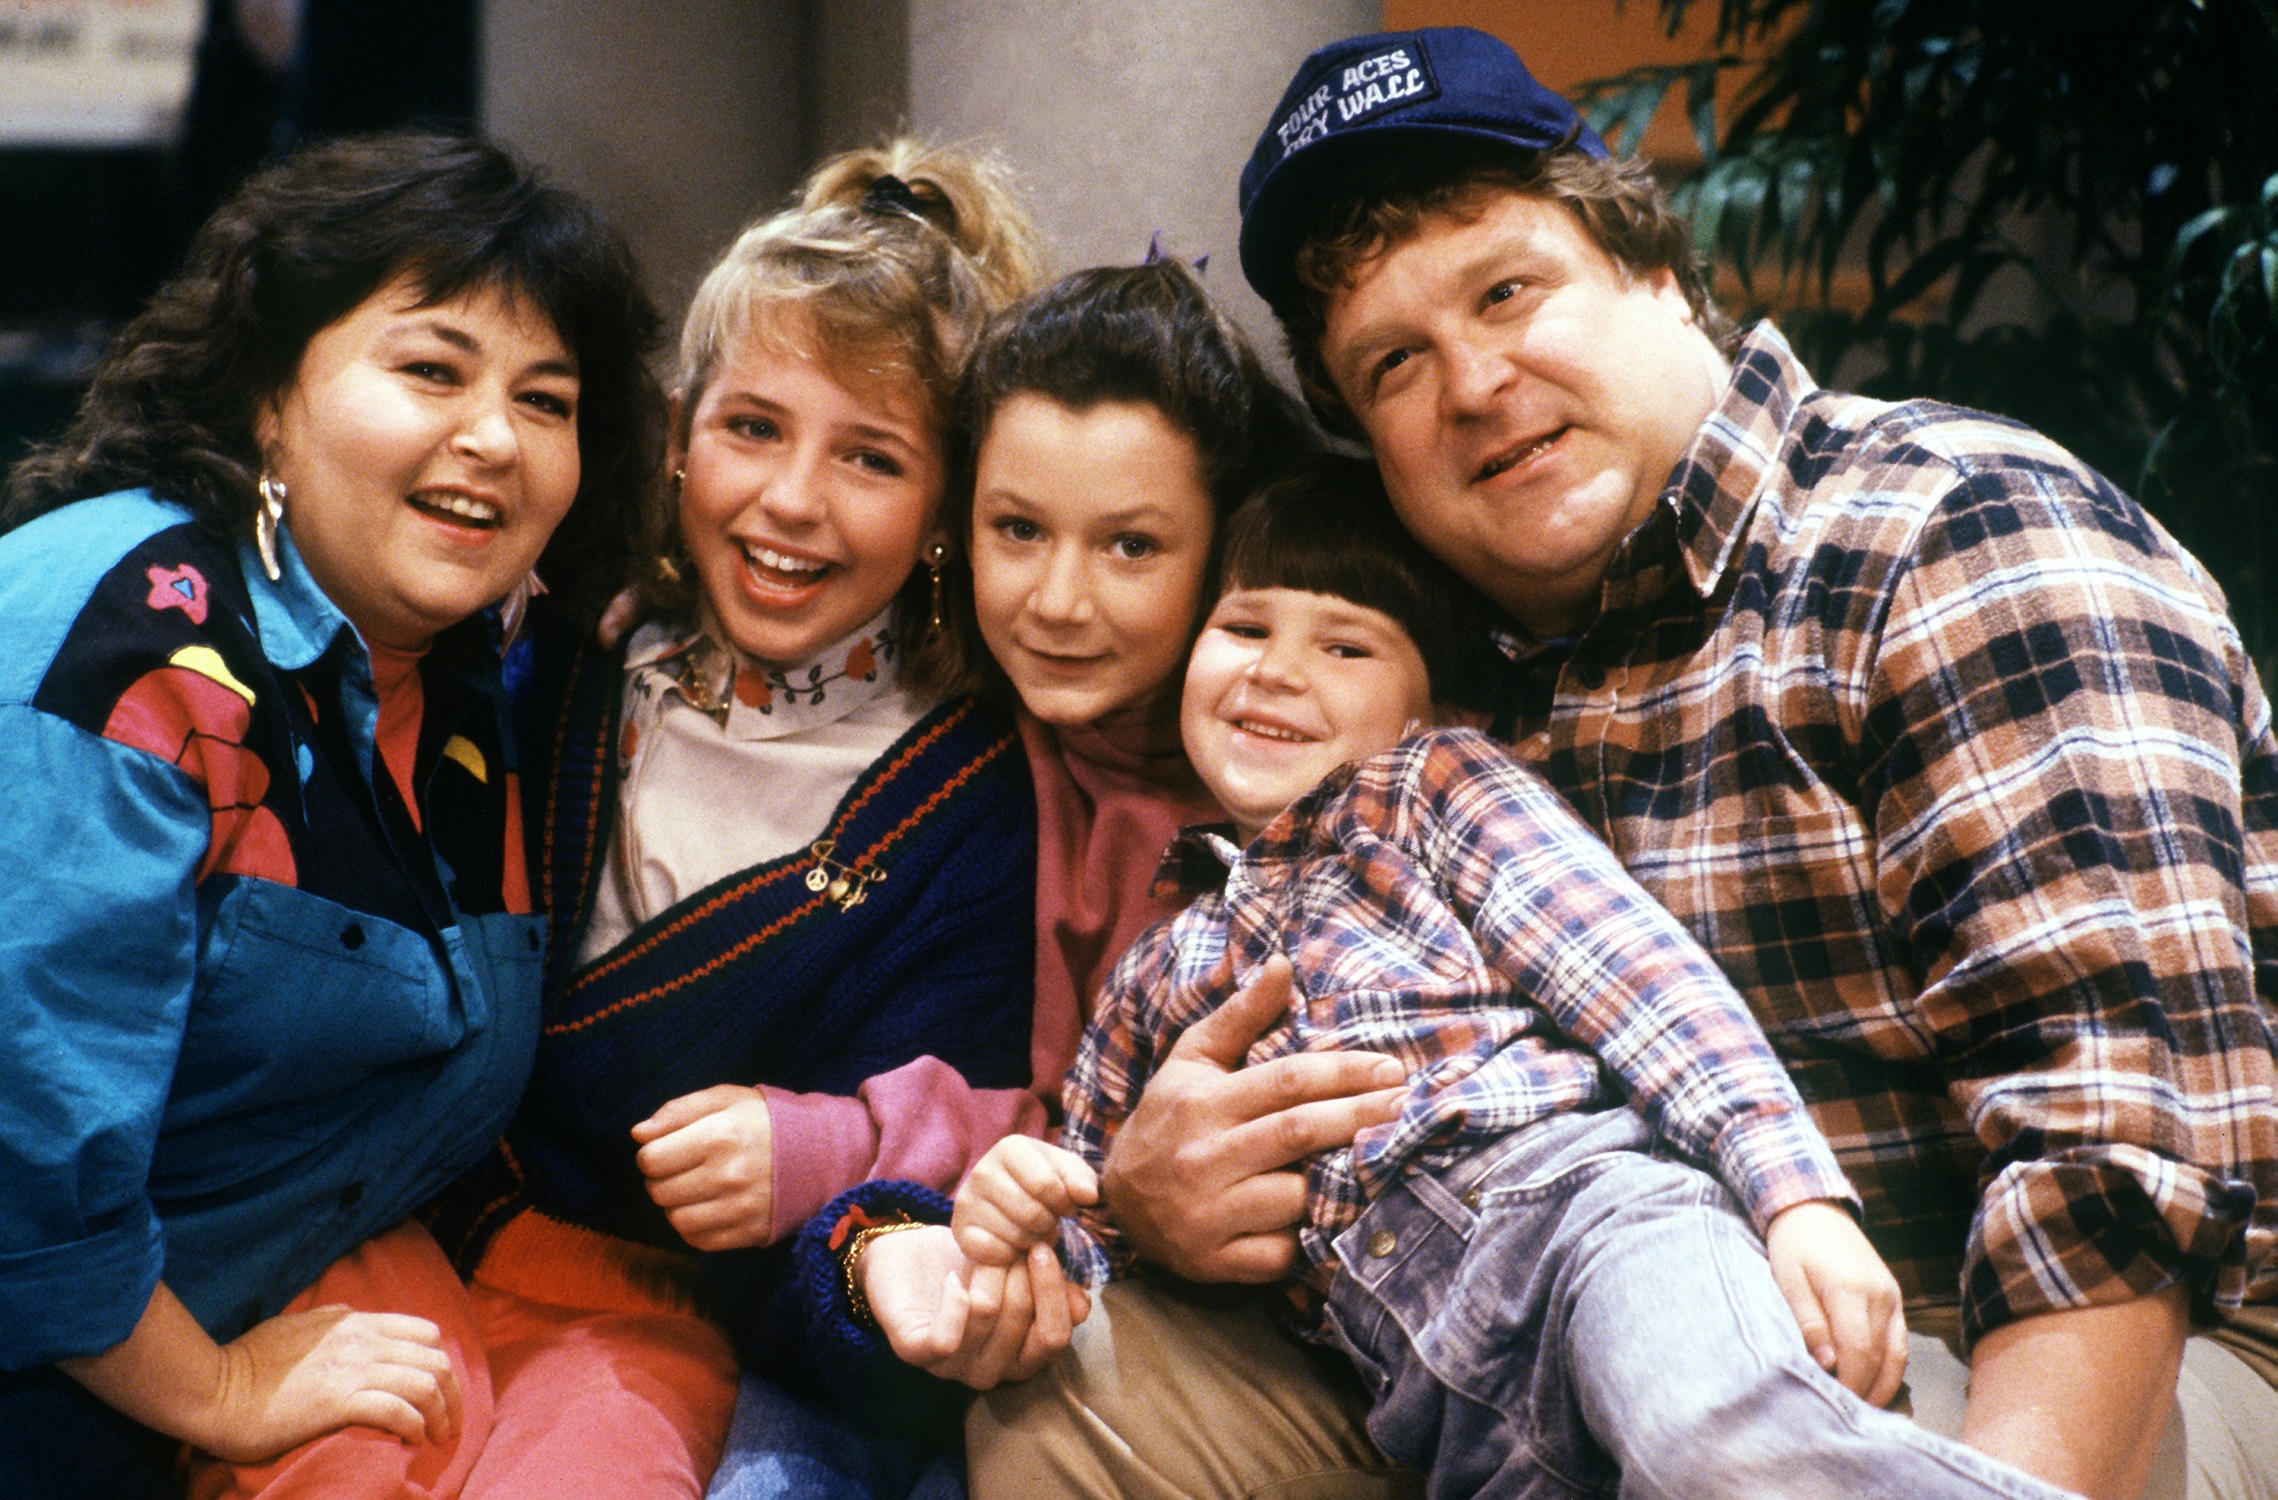 The cast of 'Roseanne'